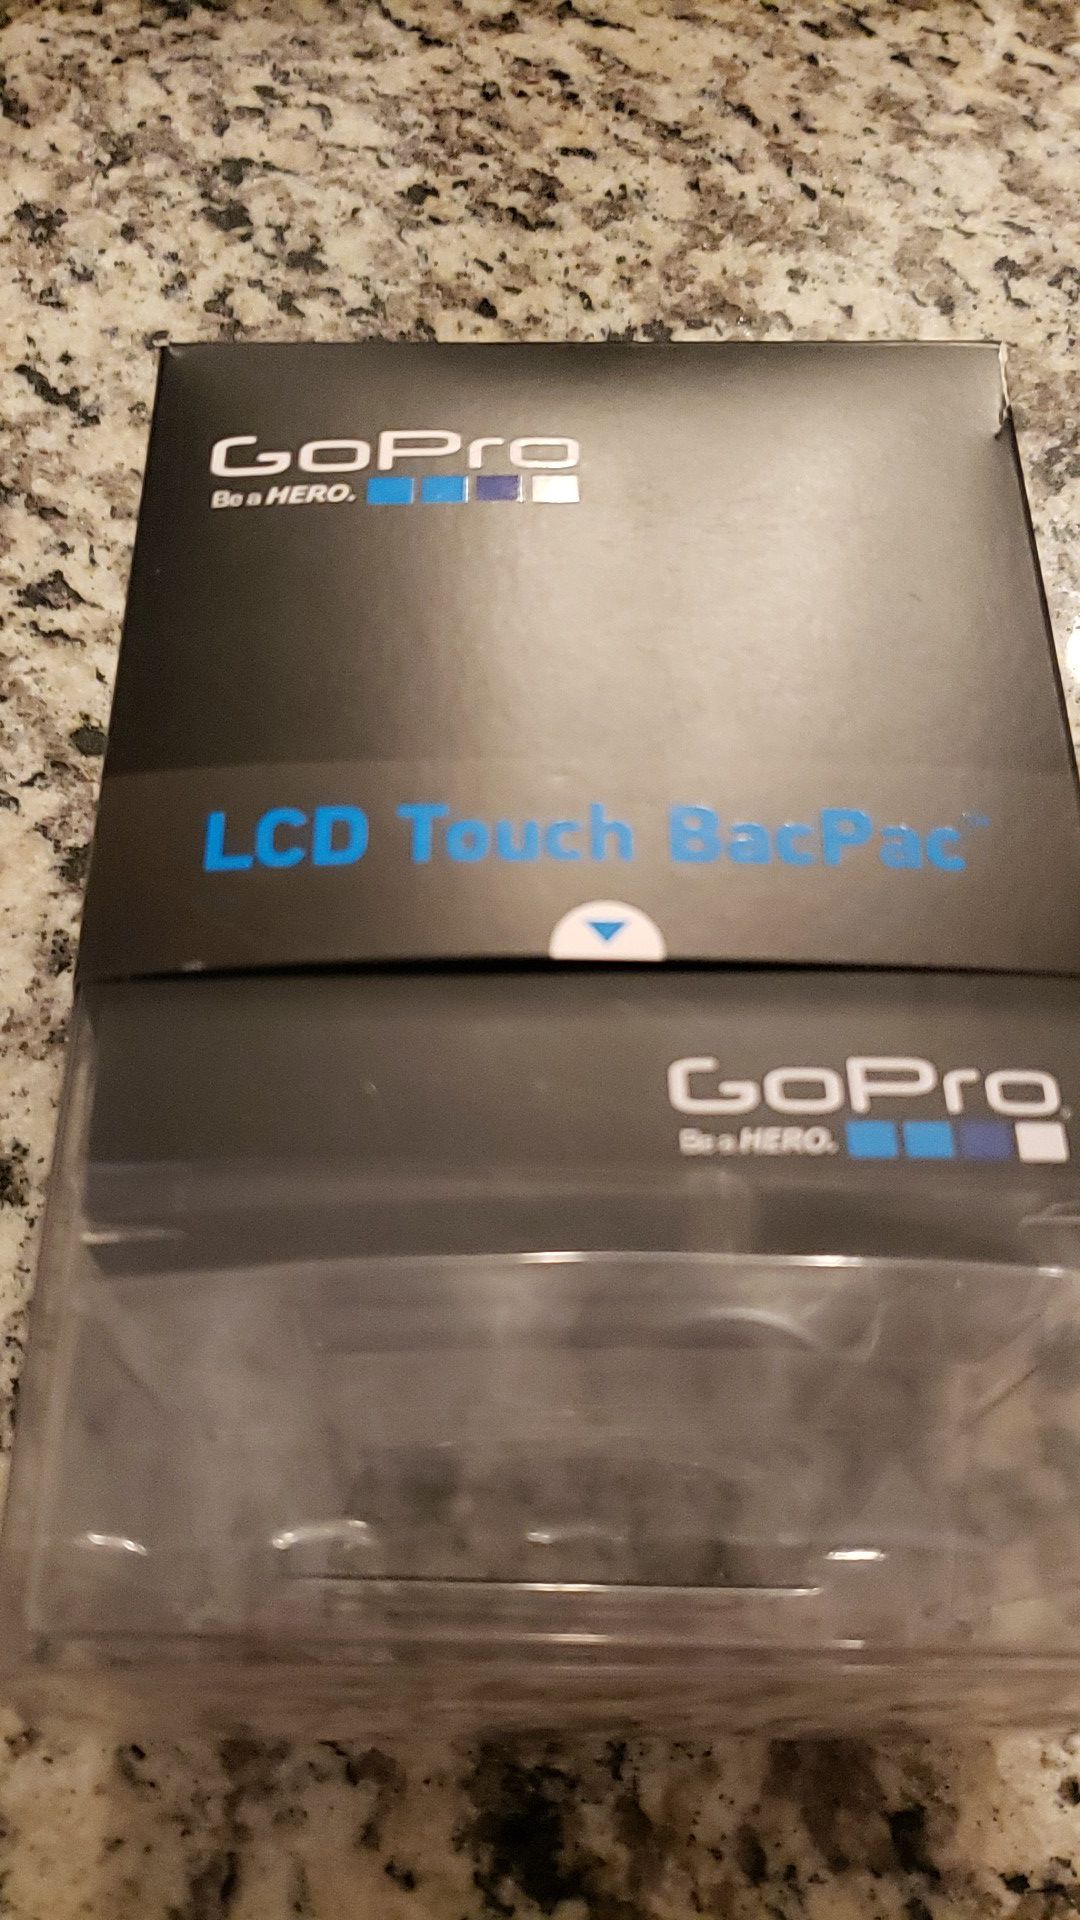 LCD touch bacpac